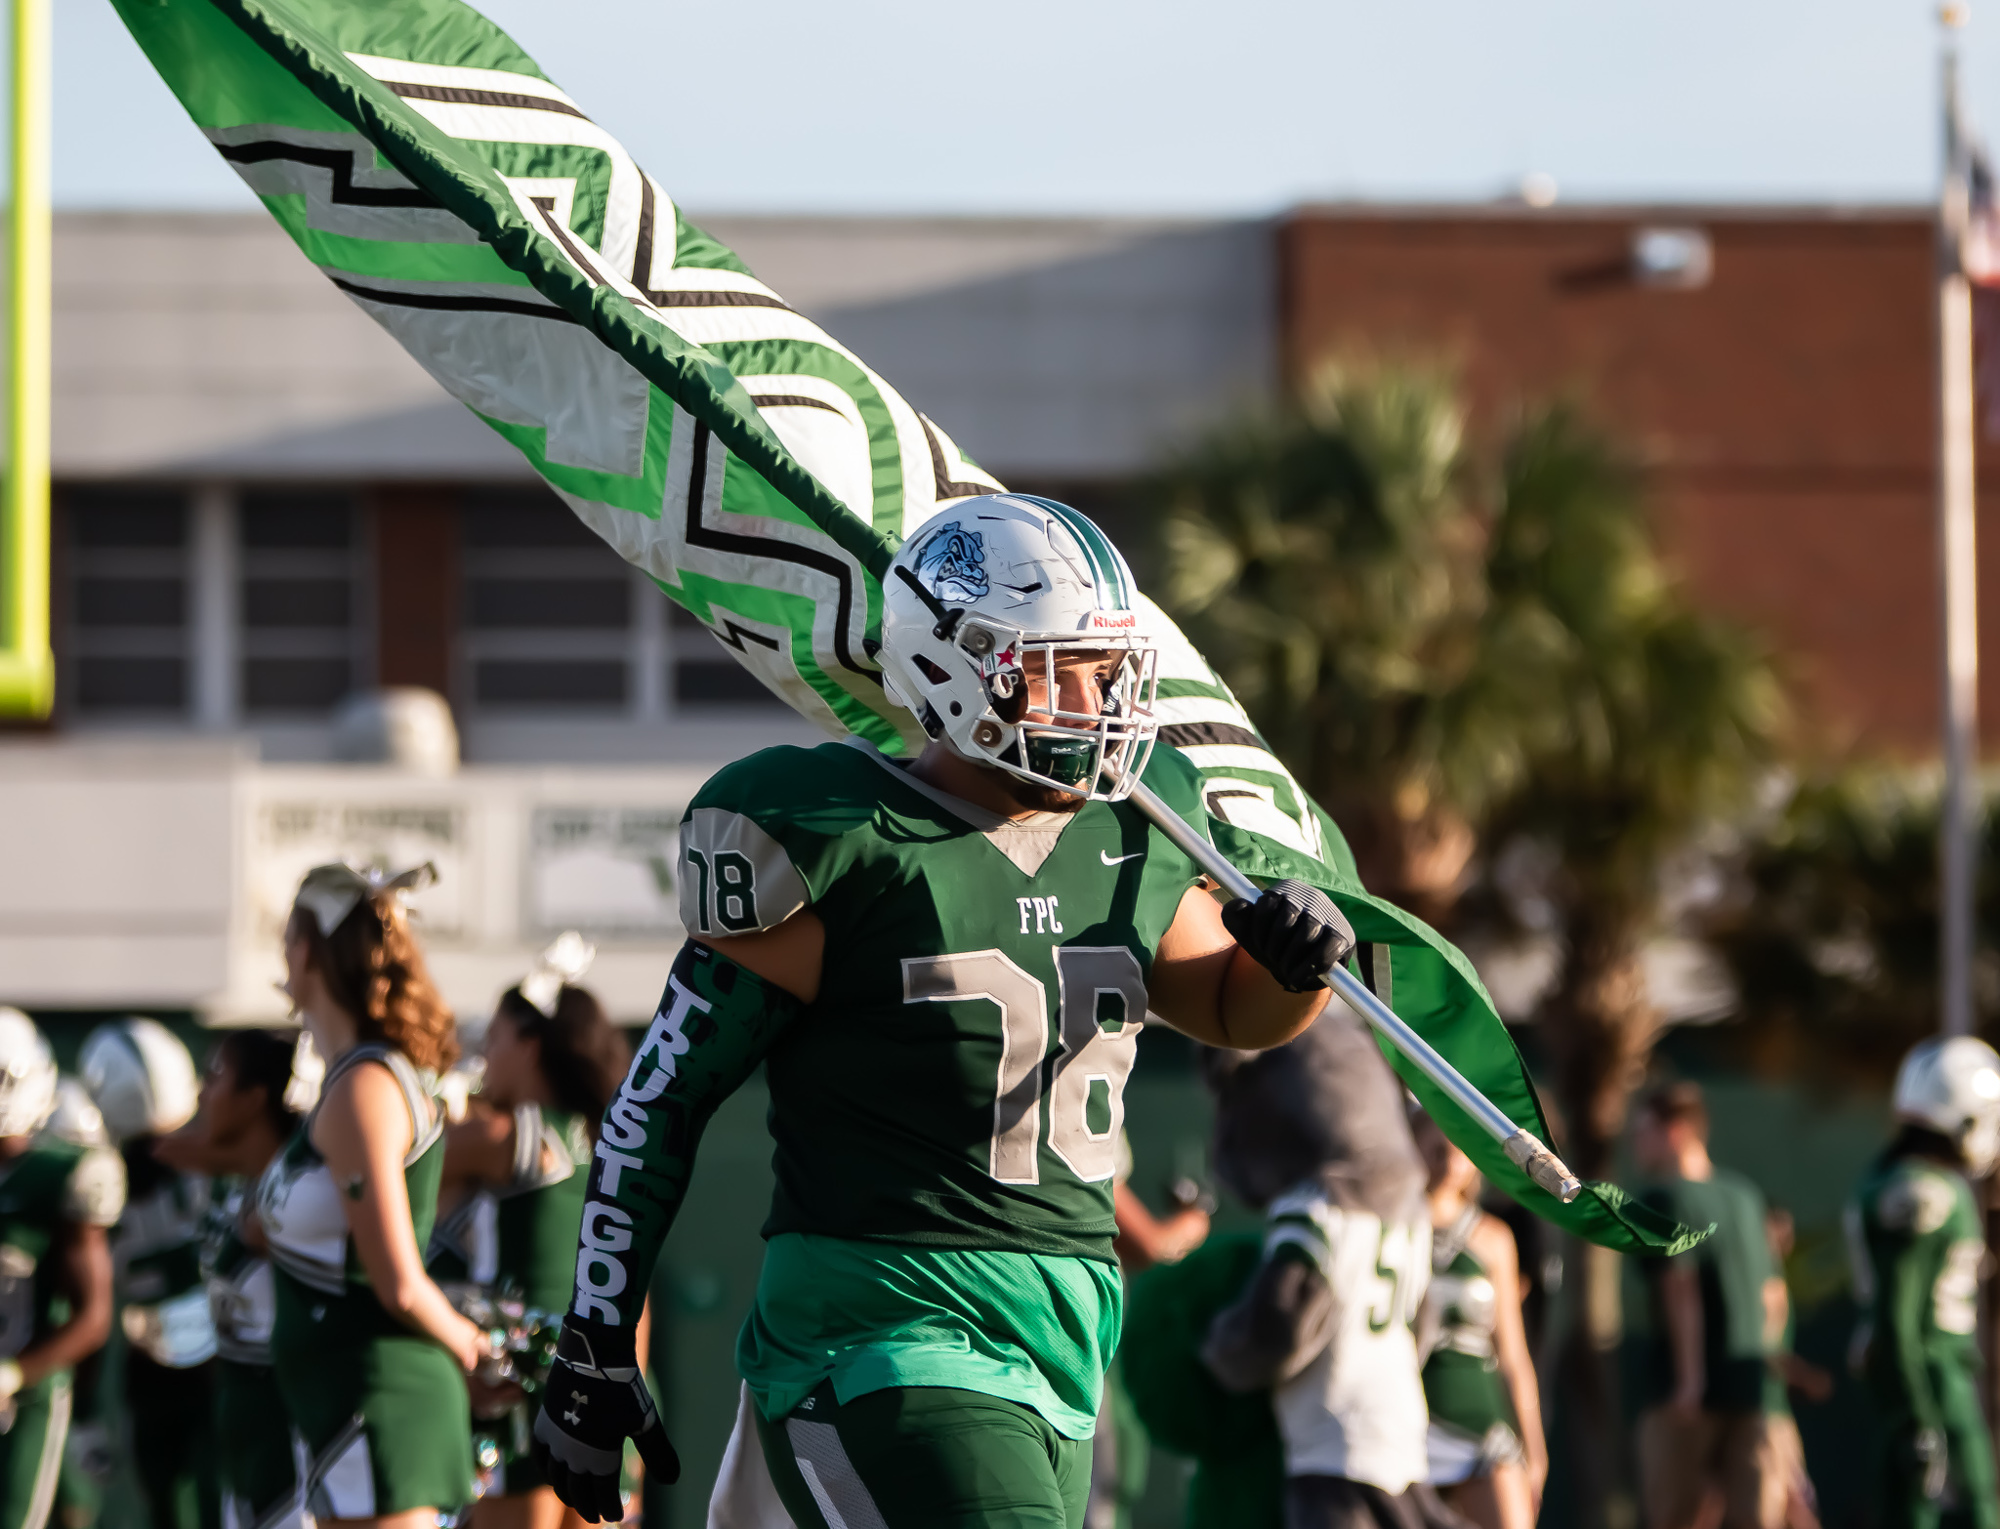 Bulldogs offensive lineman Devon Conkrite waves the FPC flag during the season opener against Matanzas. Photo by Ray Boone